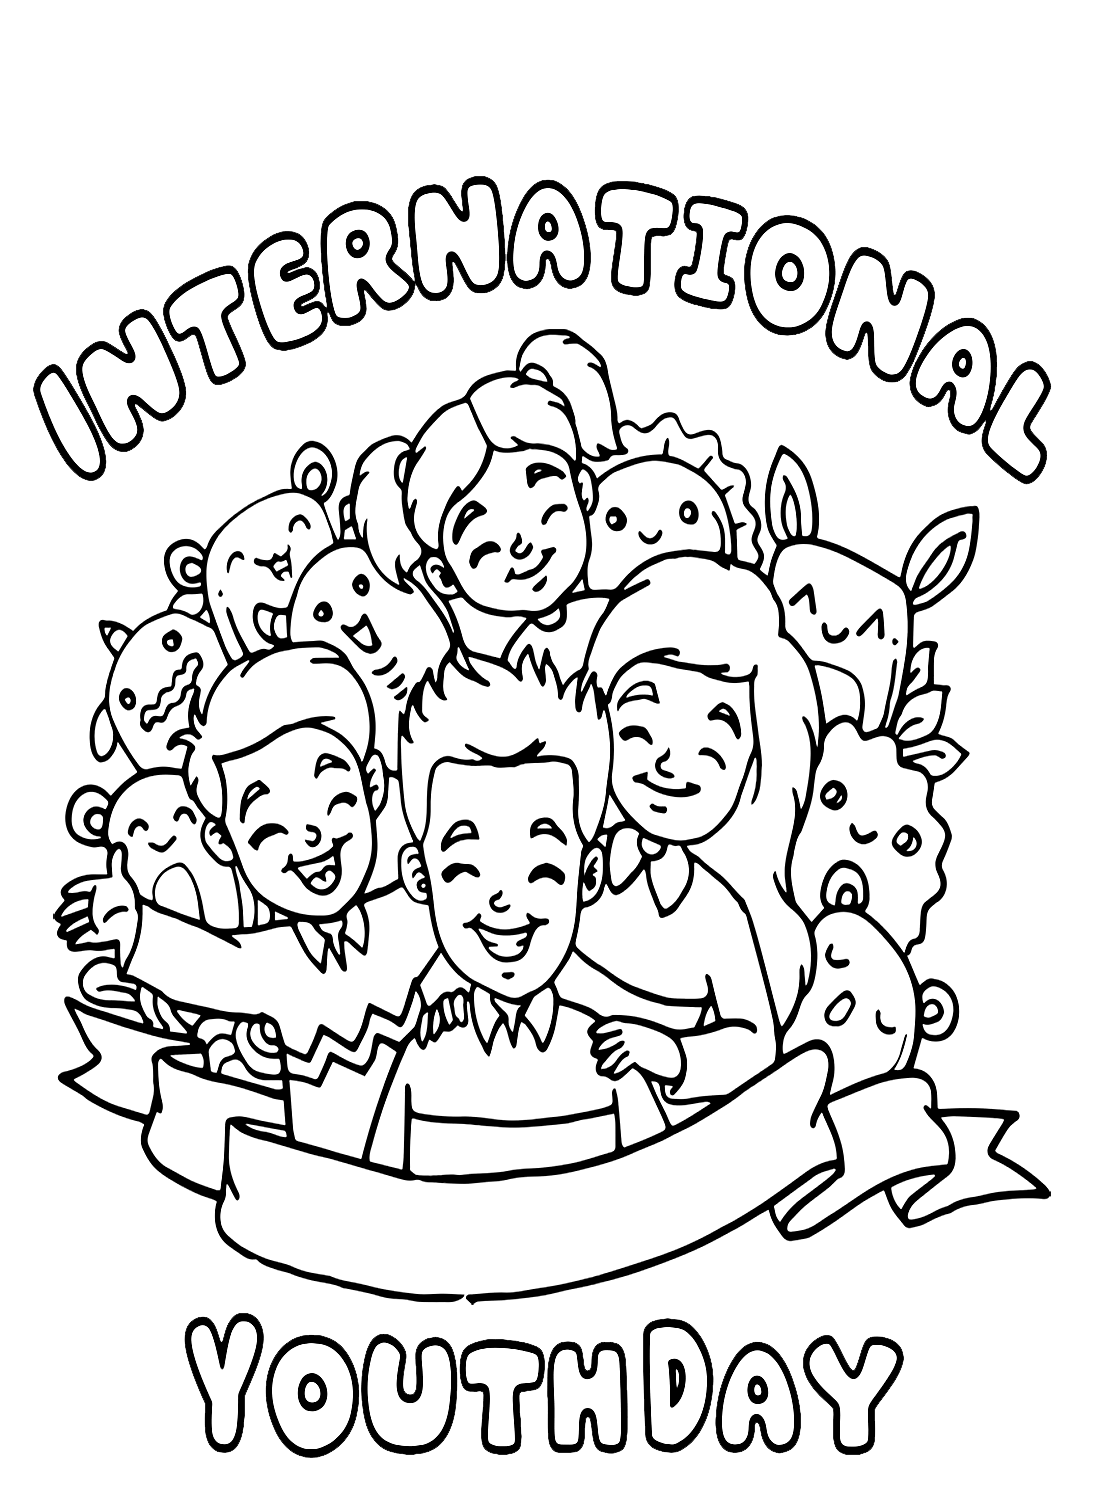 Youth Day Coloring Pages from International Youth Day